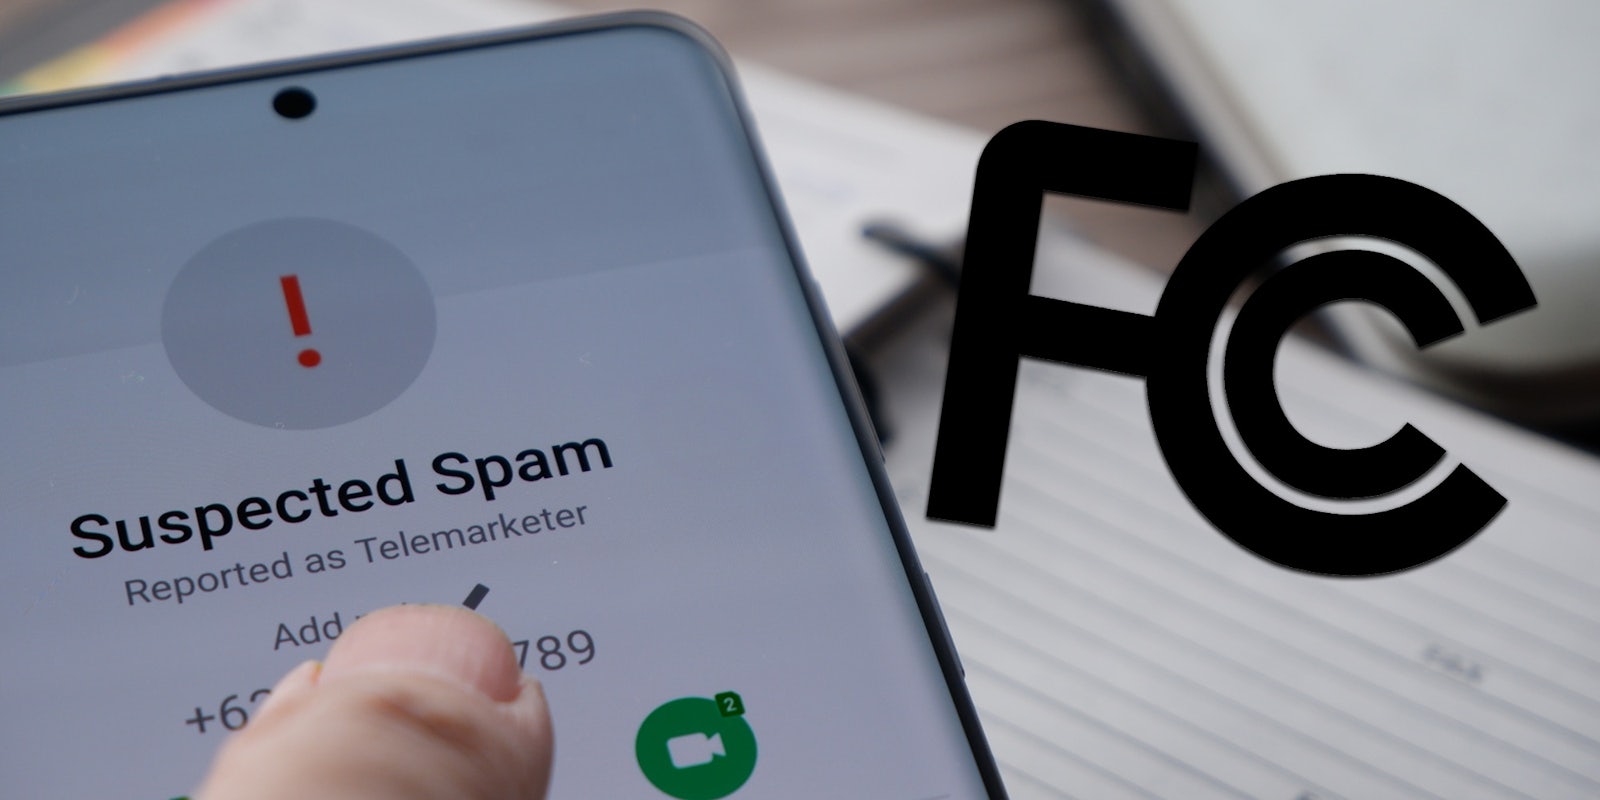 hand holding phone 'Suspected Spam' incoming call with FCC logo on right